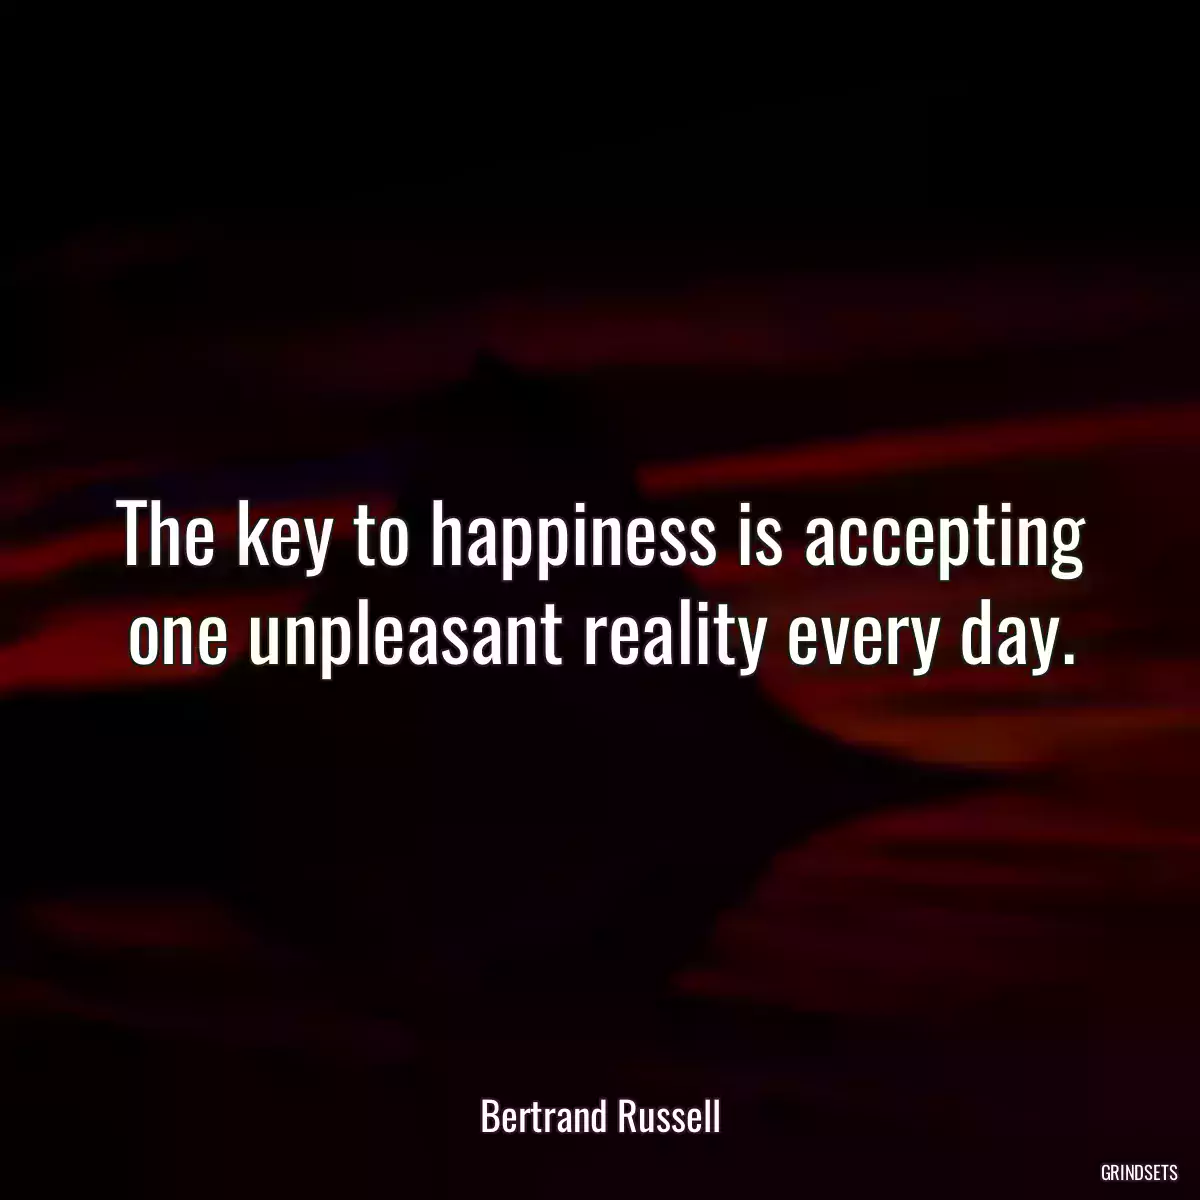 The key to happiness is accepting one unpleasant reality every day.